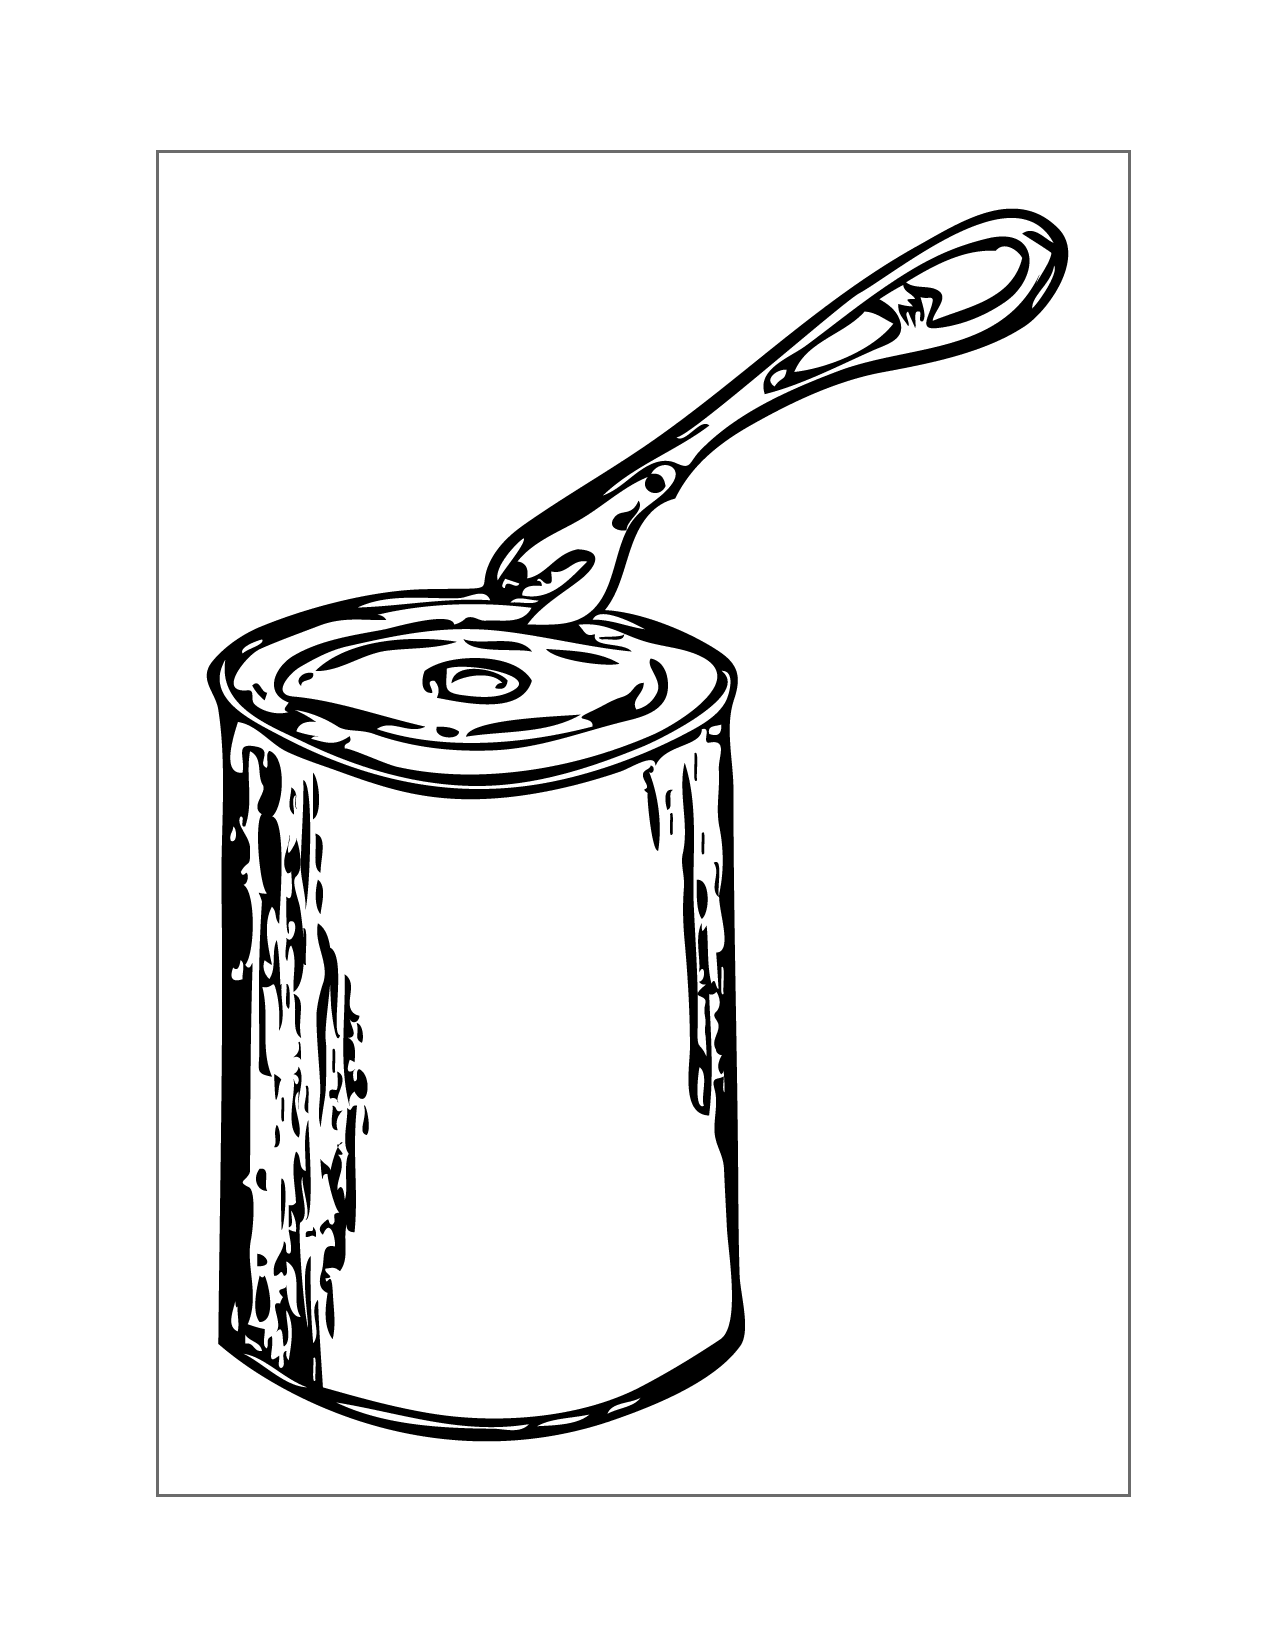 Opening Can Of Food For Camping Coloring Page